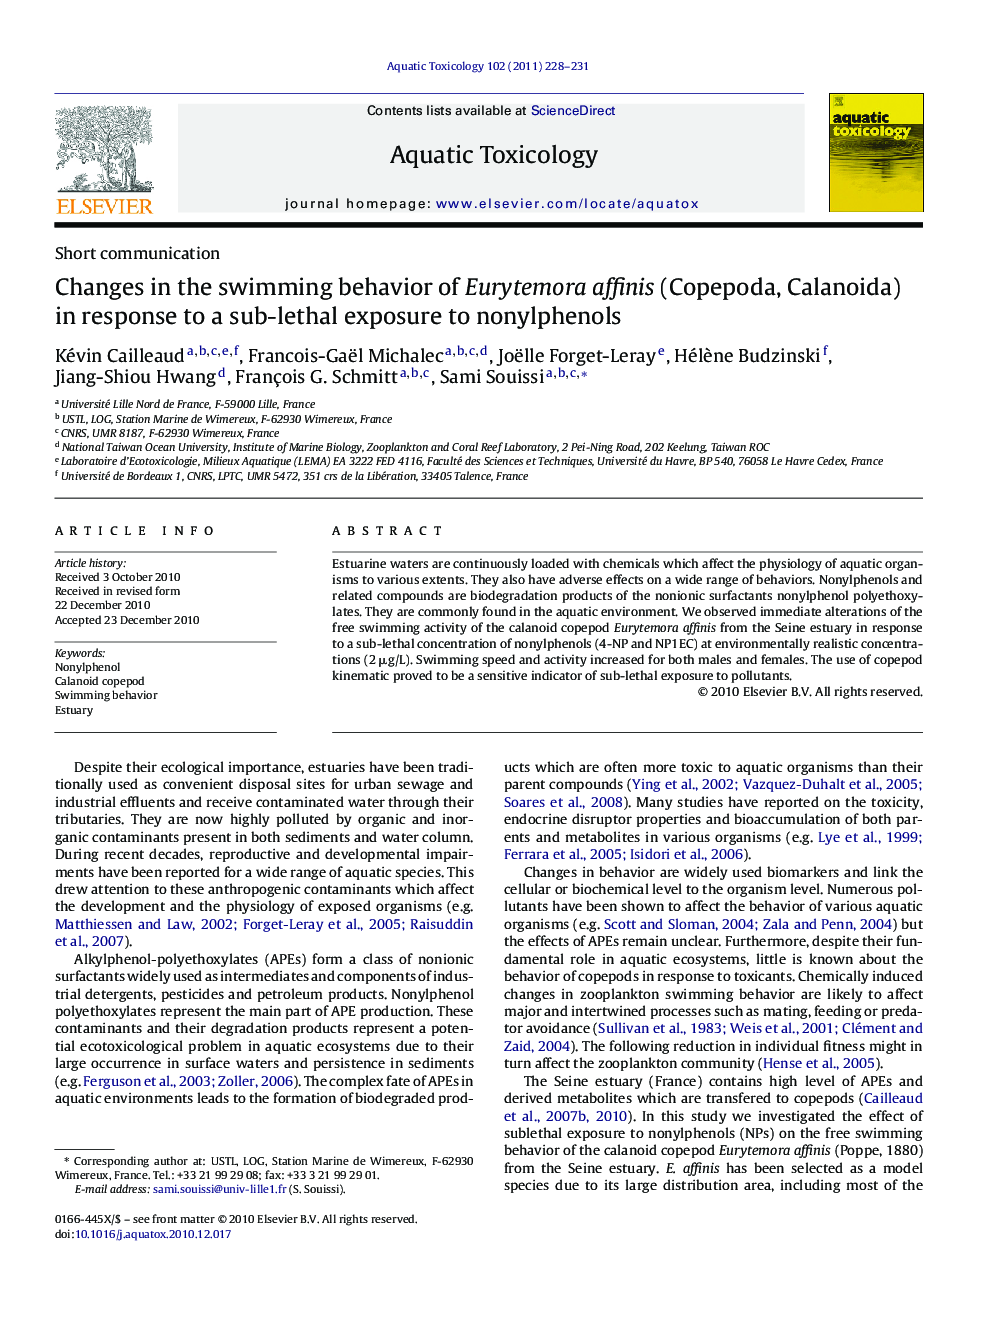 Changes in the swimming behavior of Eurytemora affinis (Copepoda, Calanoida) in response to a sub-lethal exposure to nonylphenols